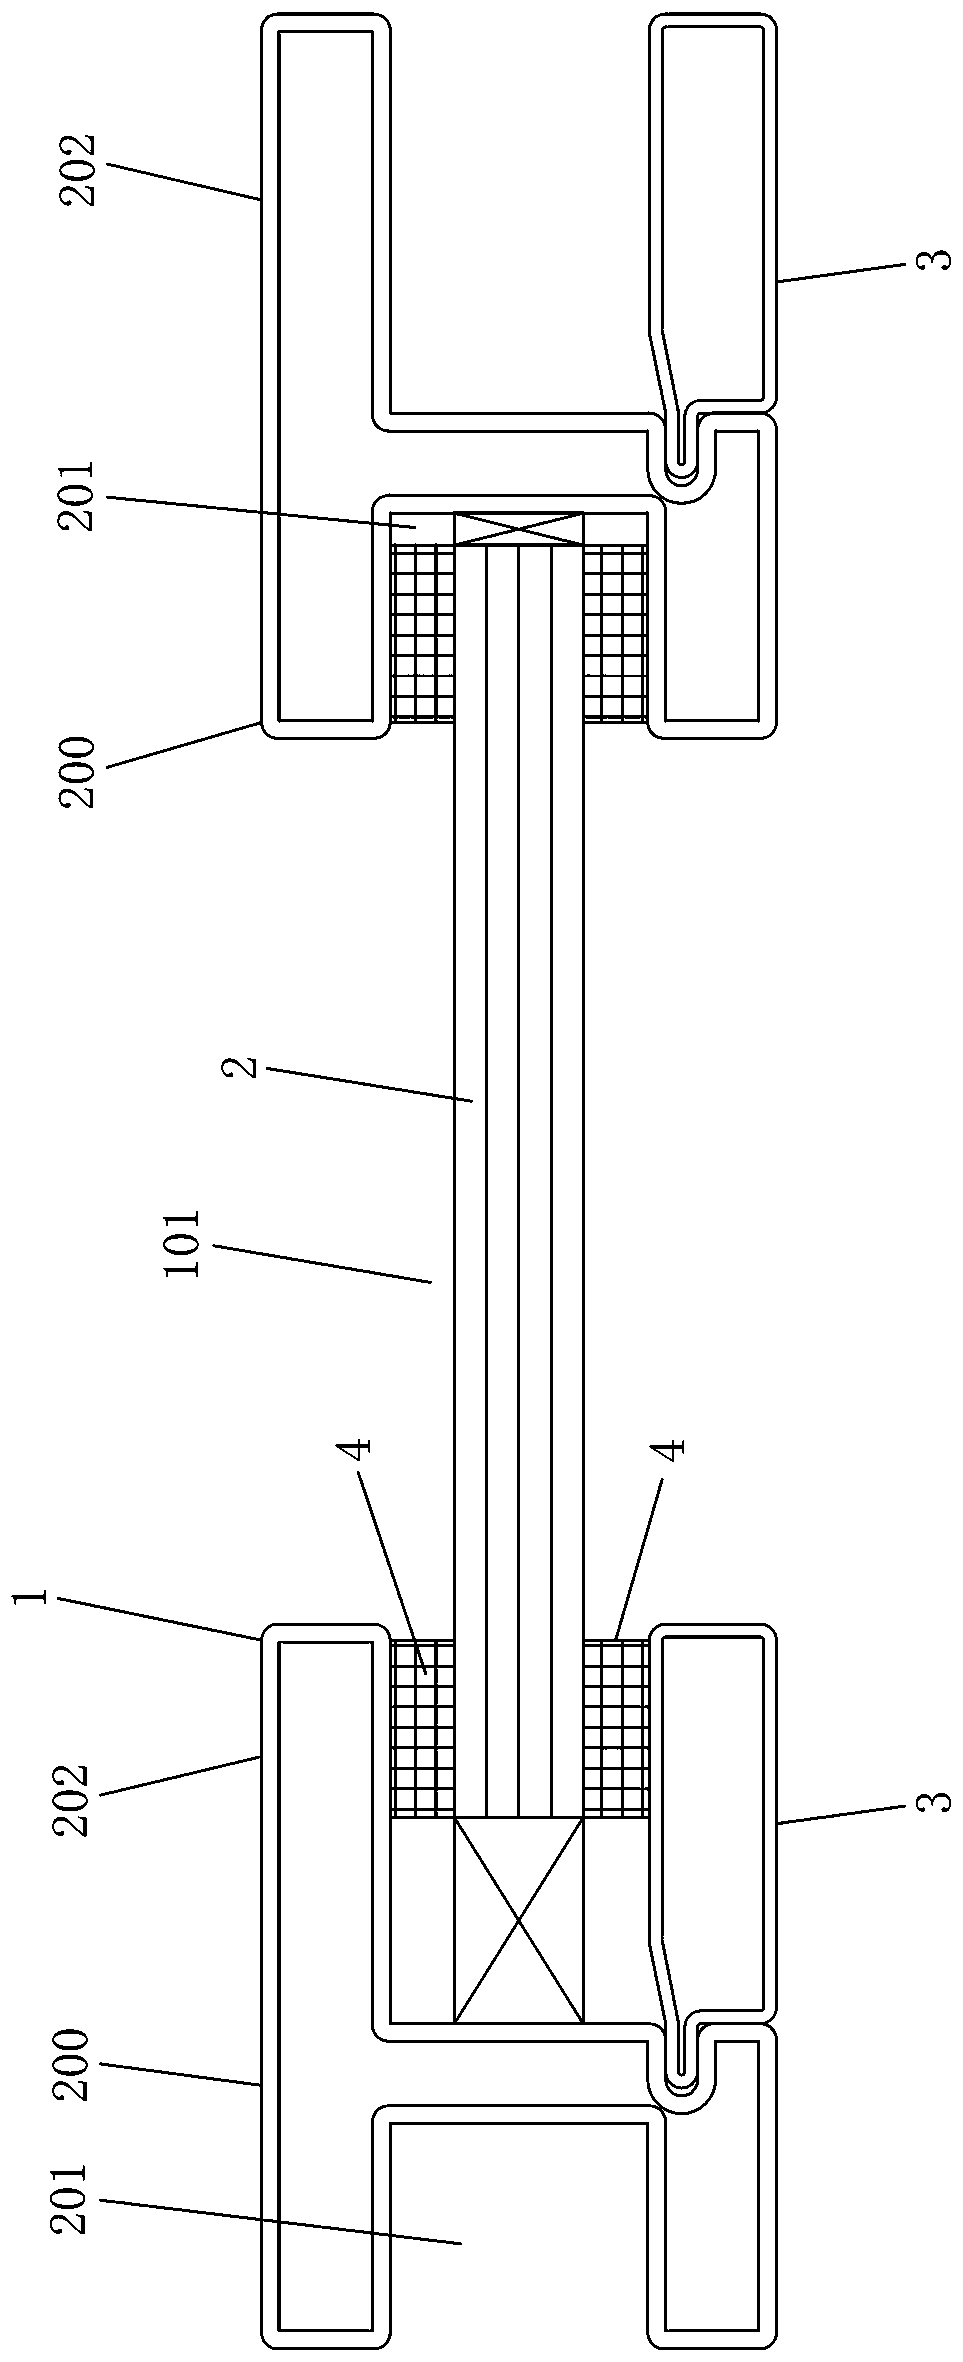 Frame body structure of door and window system